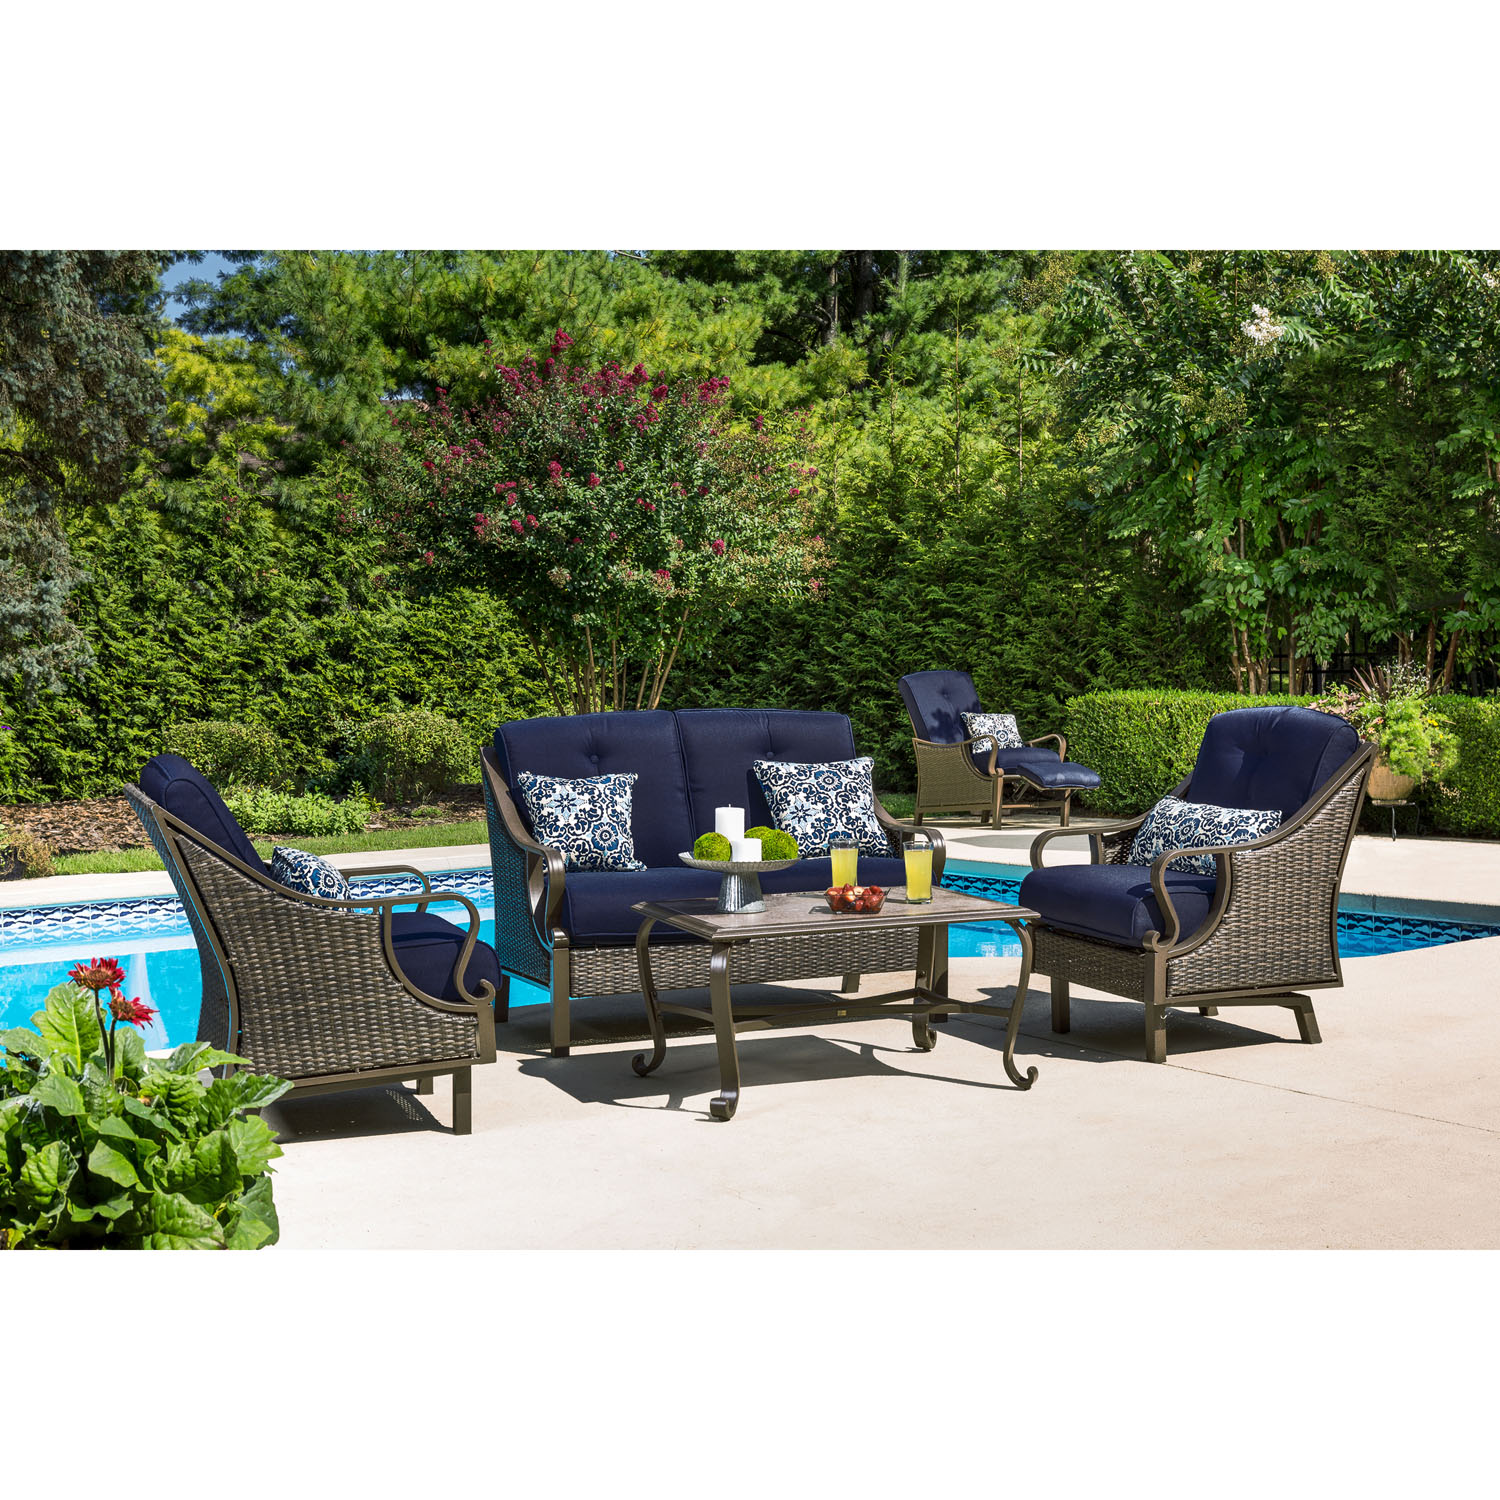 Hanover Ventura 4-Piece Steel Outdoor Patio Deep Seating Set Navy Blue Cushions, 4 Pillows and Rectangular Coffee Table, VENTURA4PC-NVY - image 3 of 12